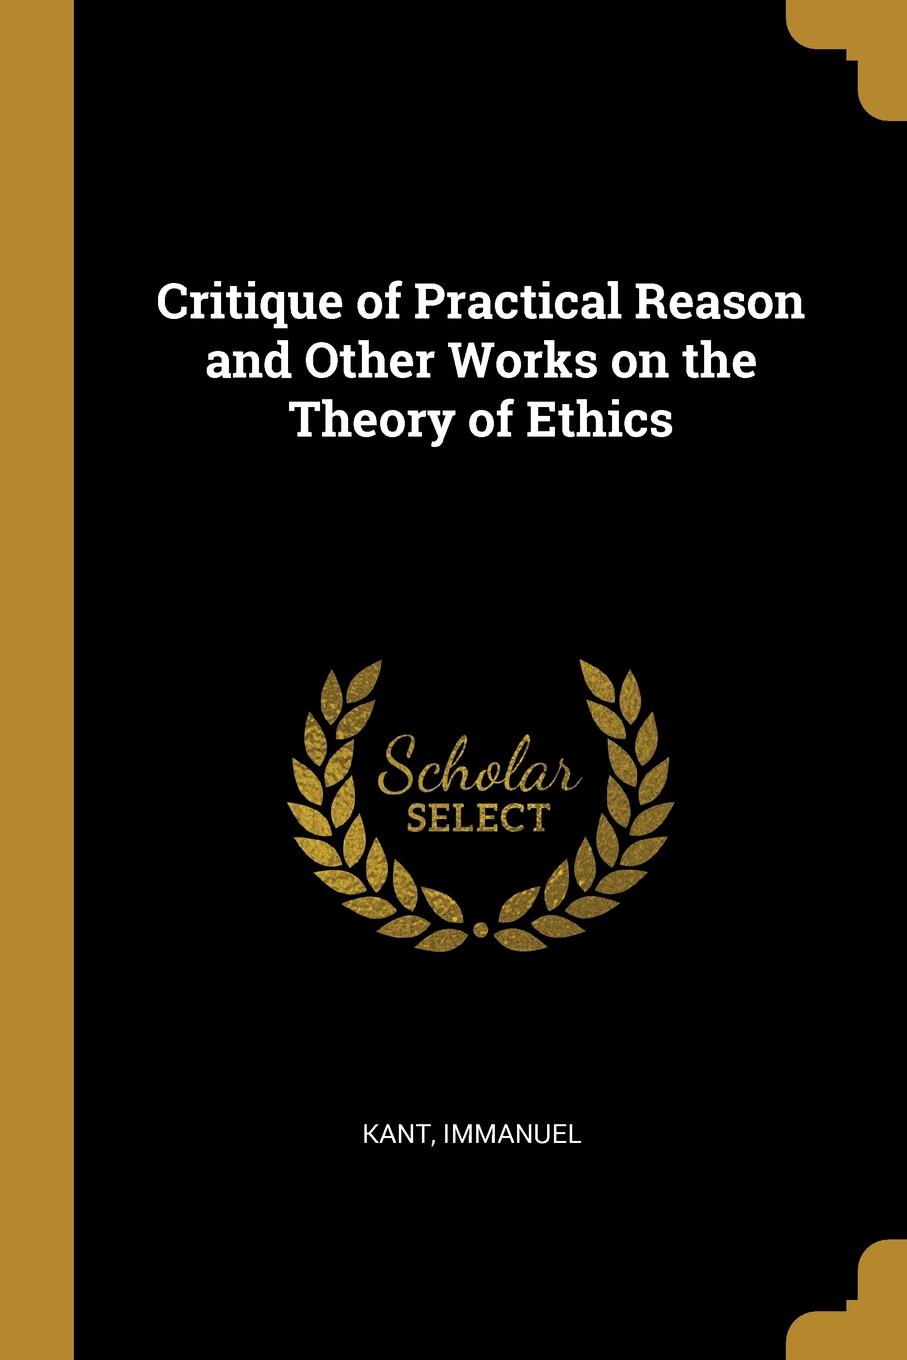 Critique of Practical Reason and Other Works on the Theory of Ethics